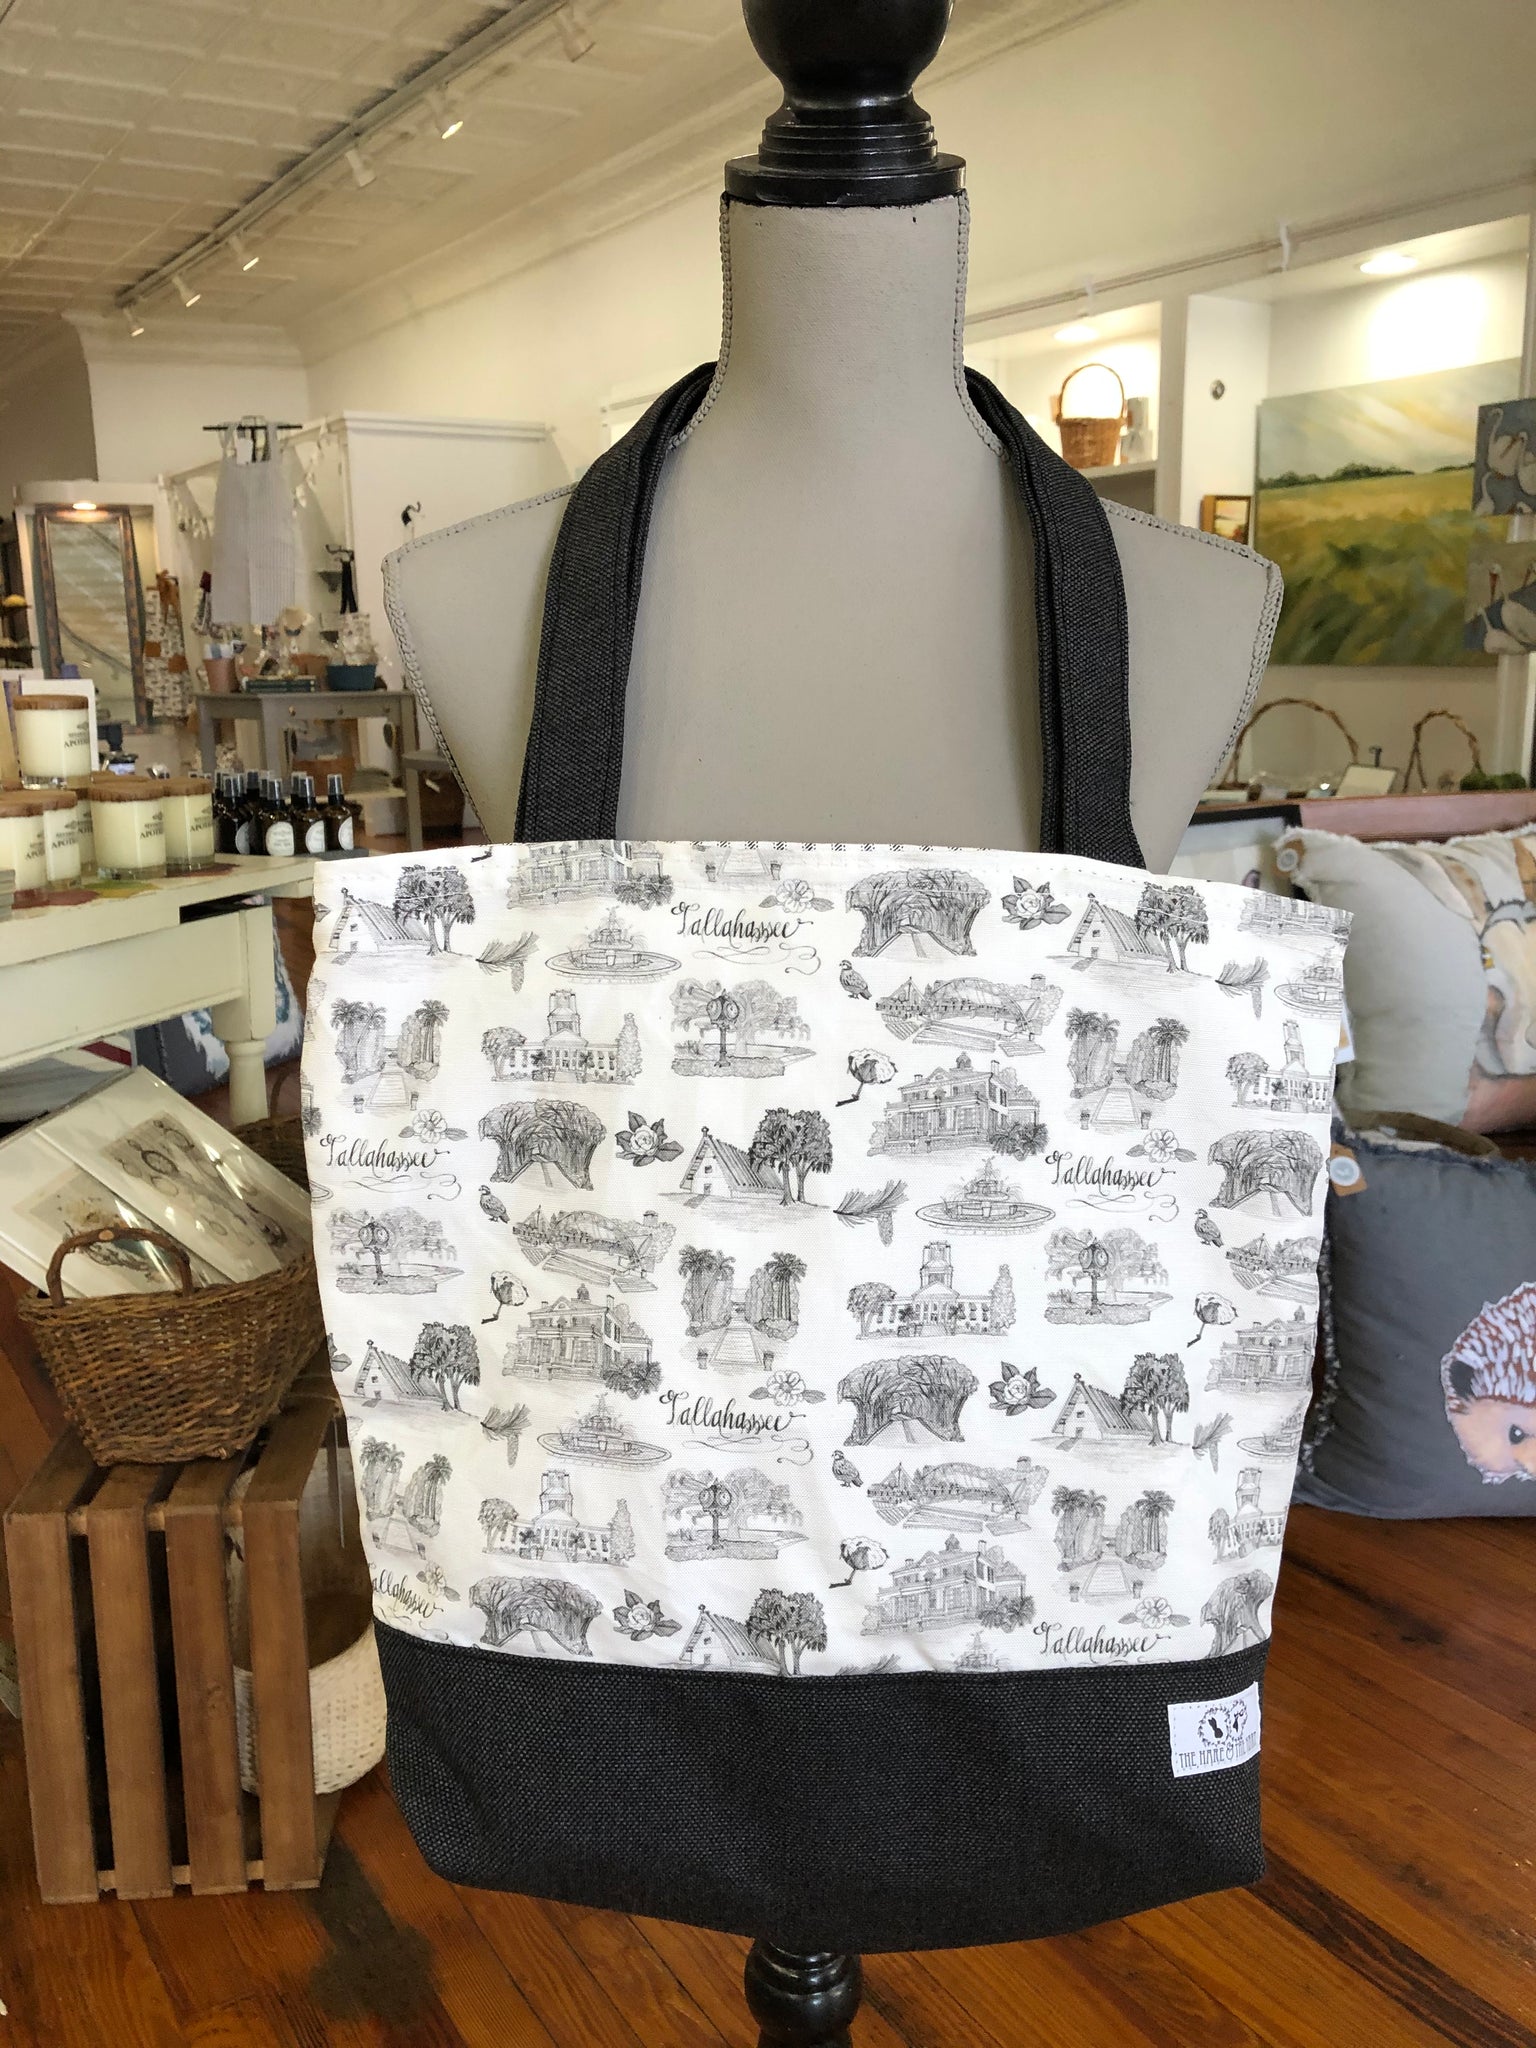 Pictured is a Toile of Tallahassee tote bag hanging from the neck of a mannequin. The tote is made of Toile of Tallahasse black and white fabric except for the base and handles of the bag, which are made of black fabric.